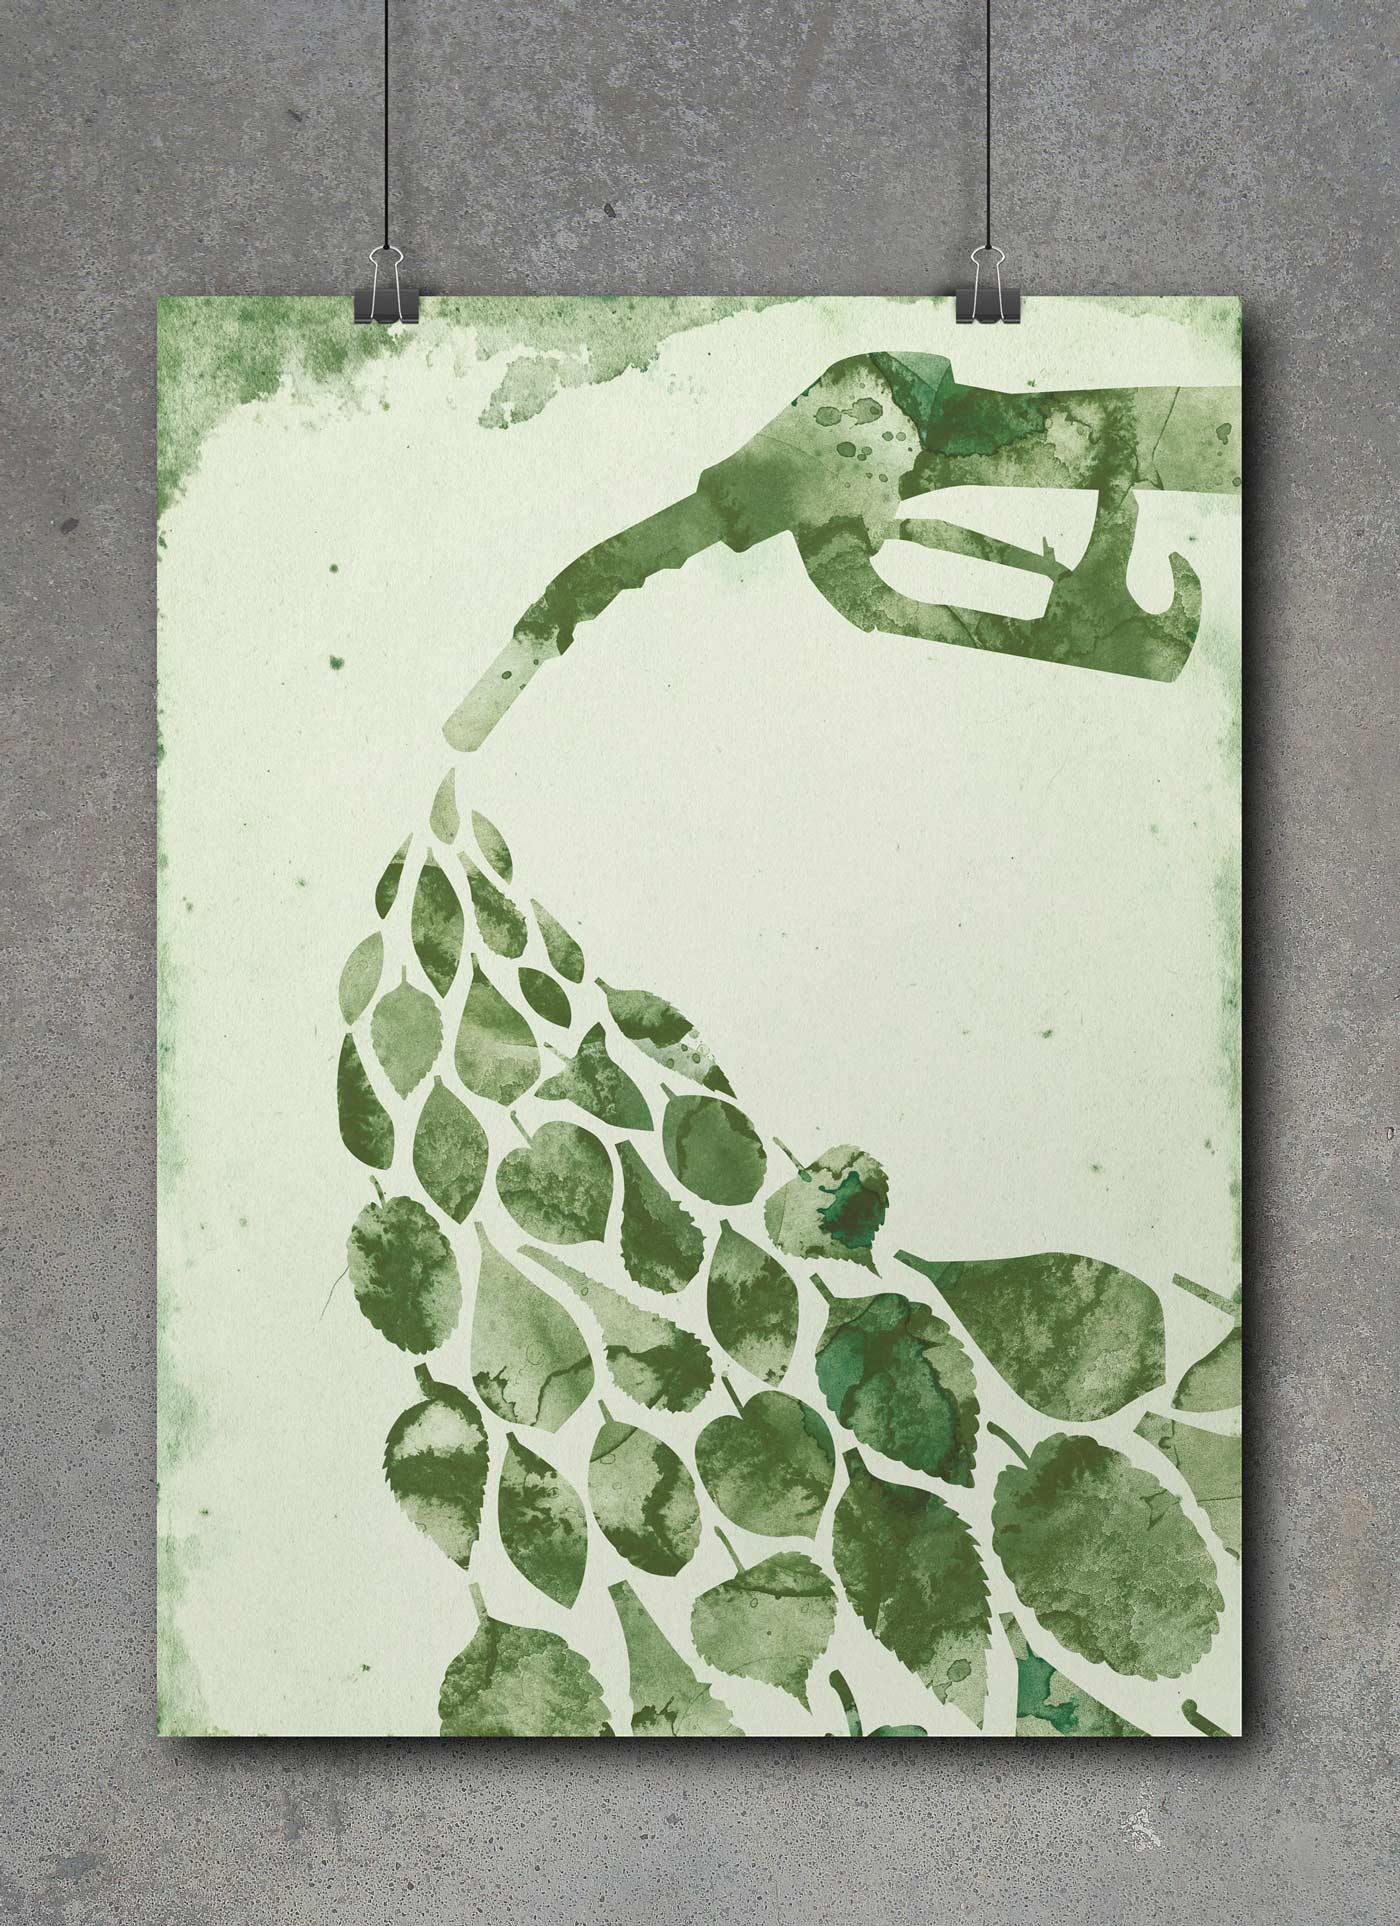 poster of gasoline drops transforming into leaves